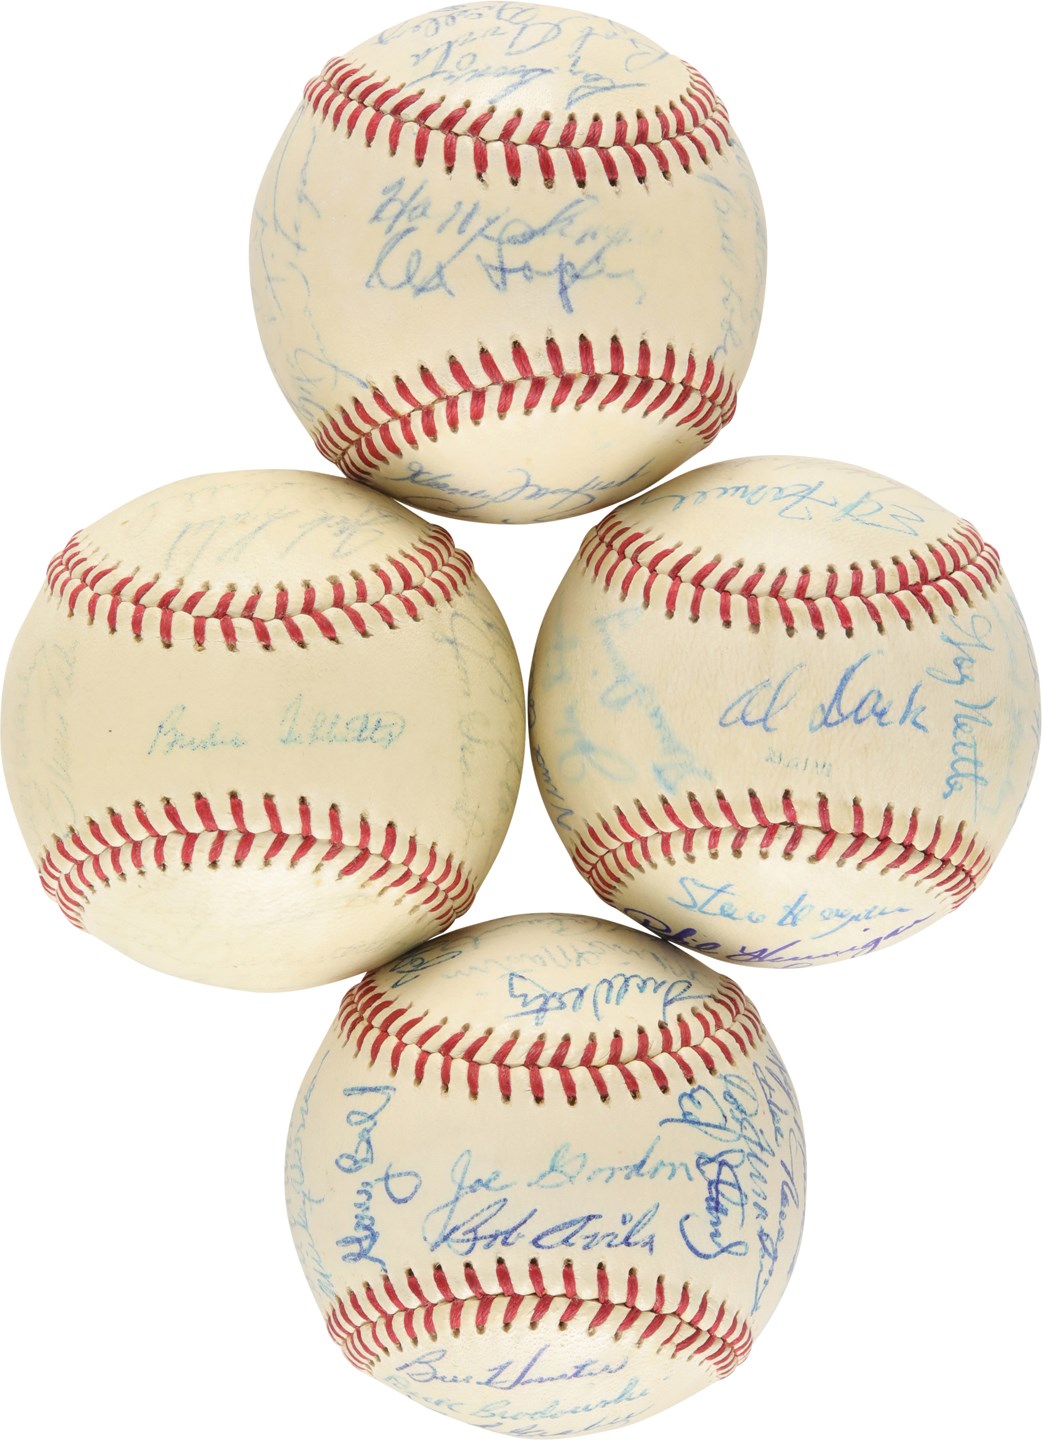 Baseball Autographs - 1952-1971 Cleveland Indians Team-Signed Ball Collection (4)